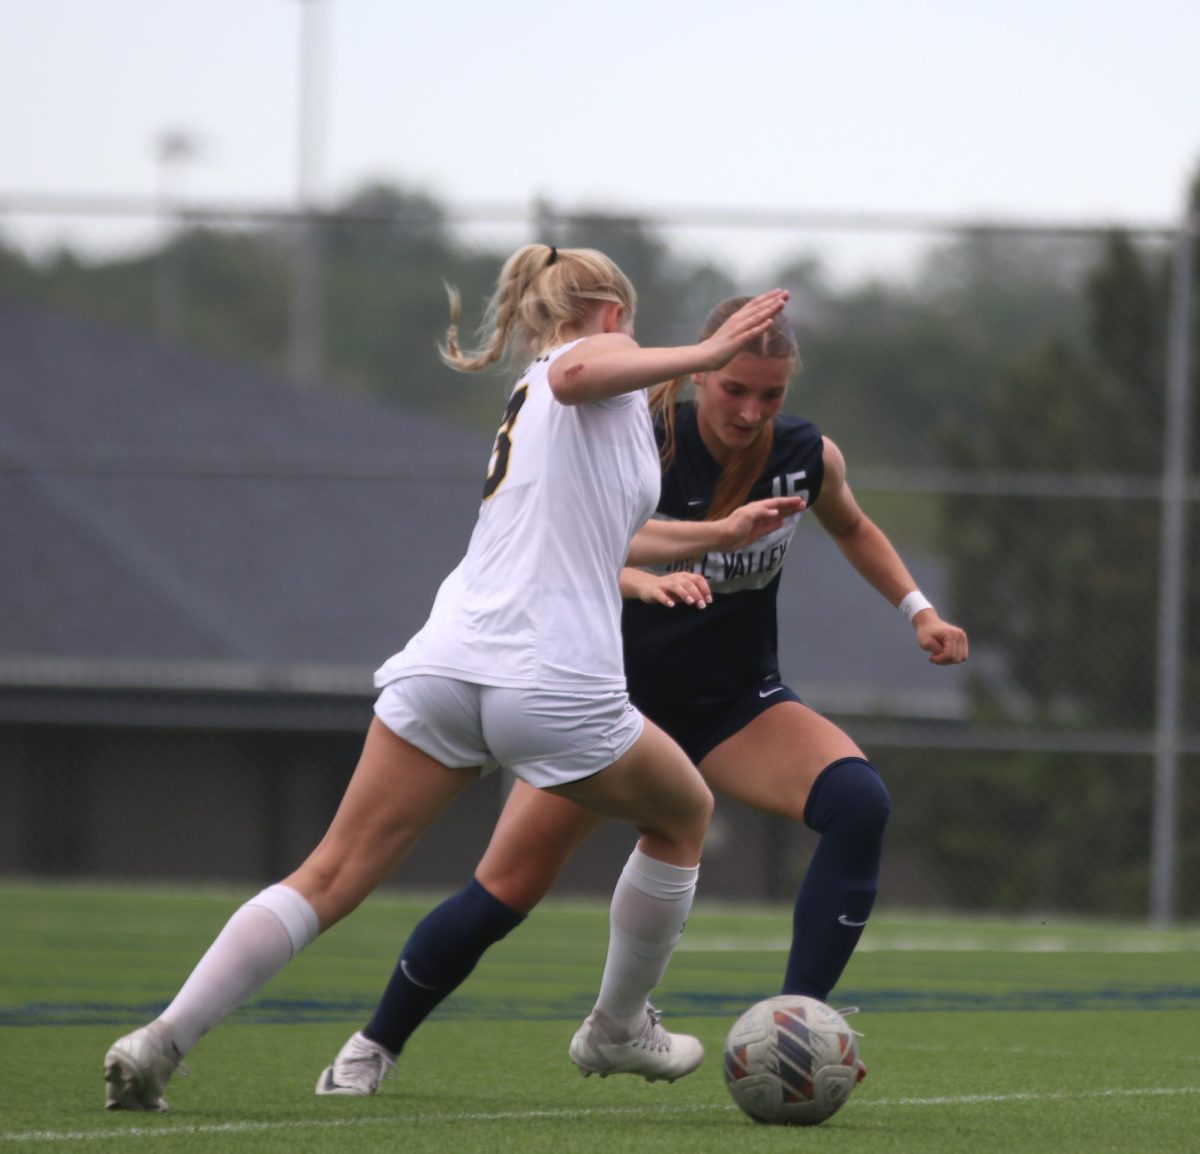 In an attempt to keep control of the ball, junior Kate Martin kicks the ball past her opponent.